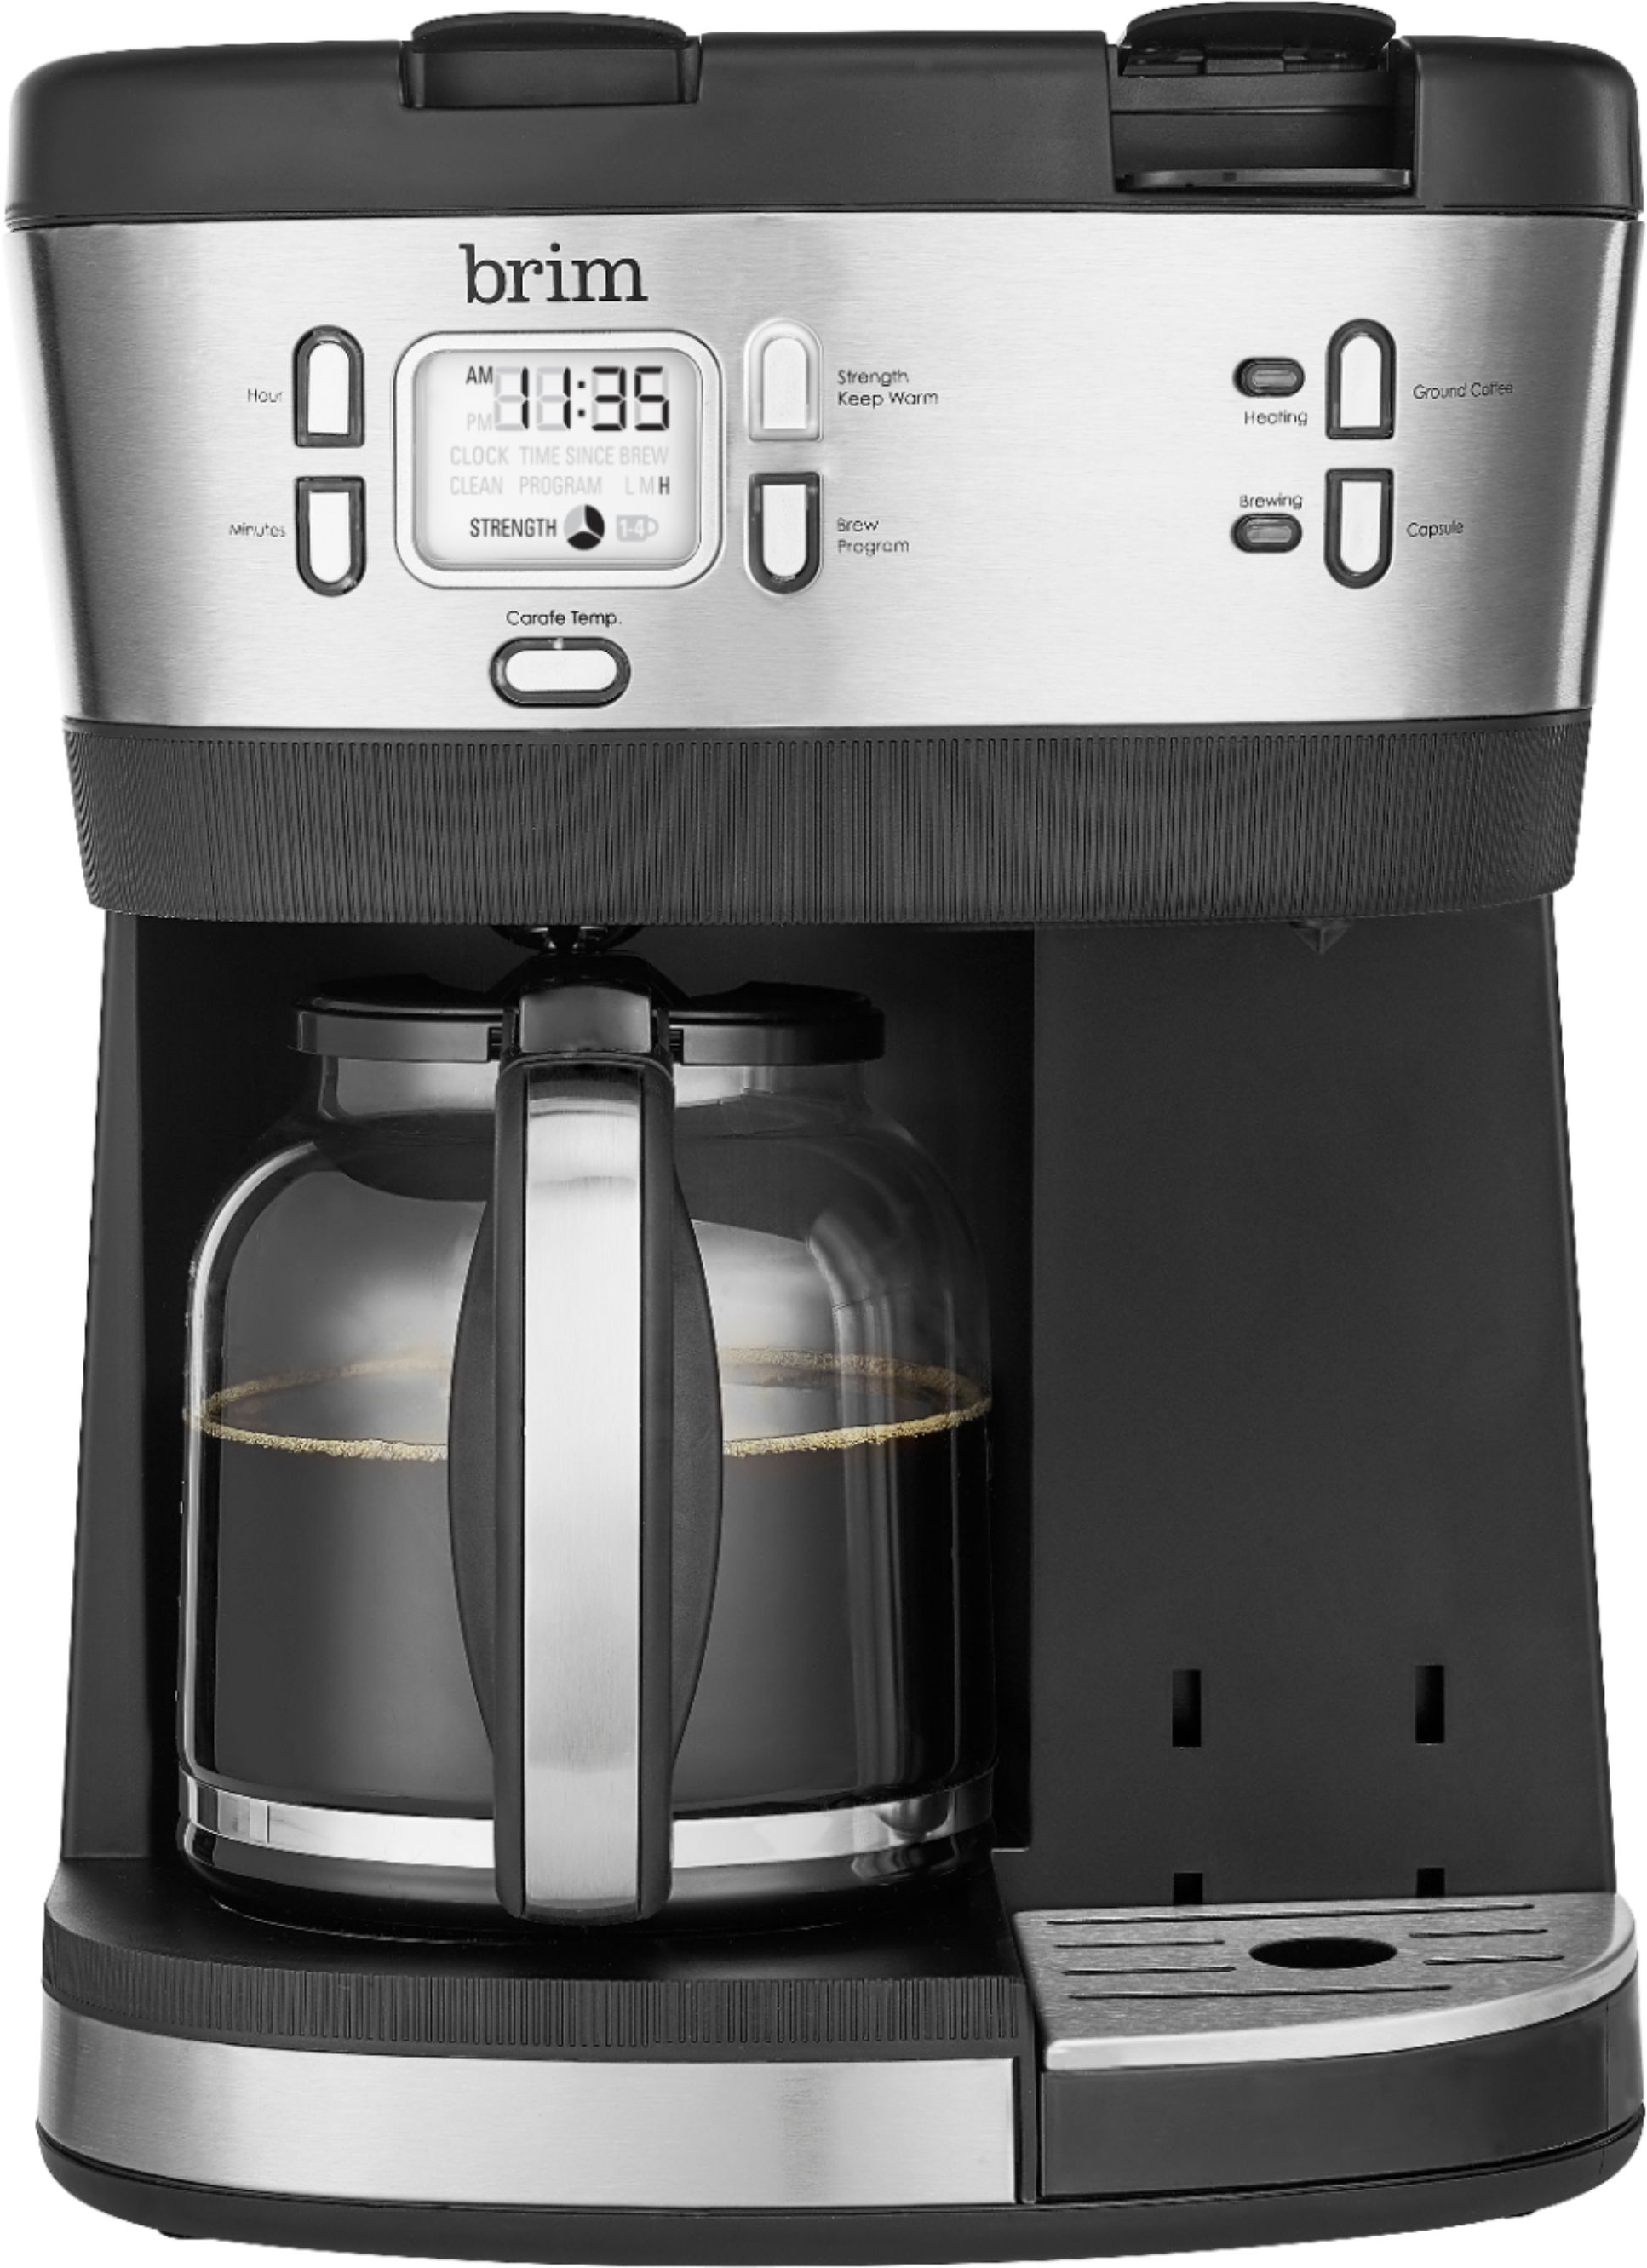 Mill & Brew 12-Cup* Coffee Maker White/Silver CM5000WD - Best Buy